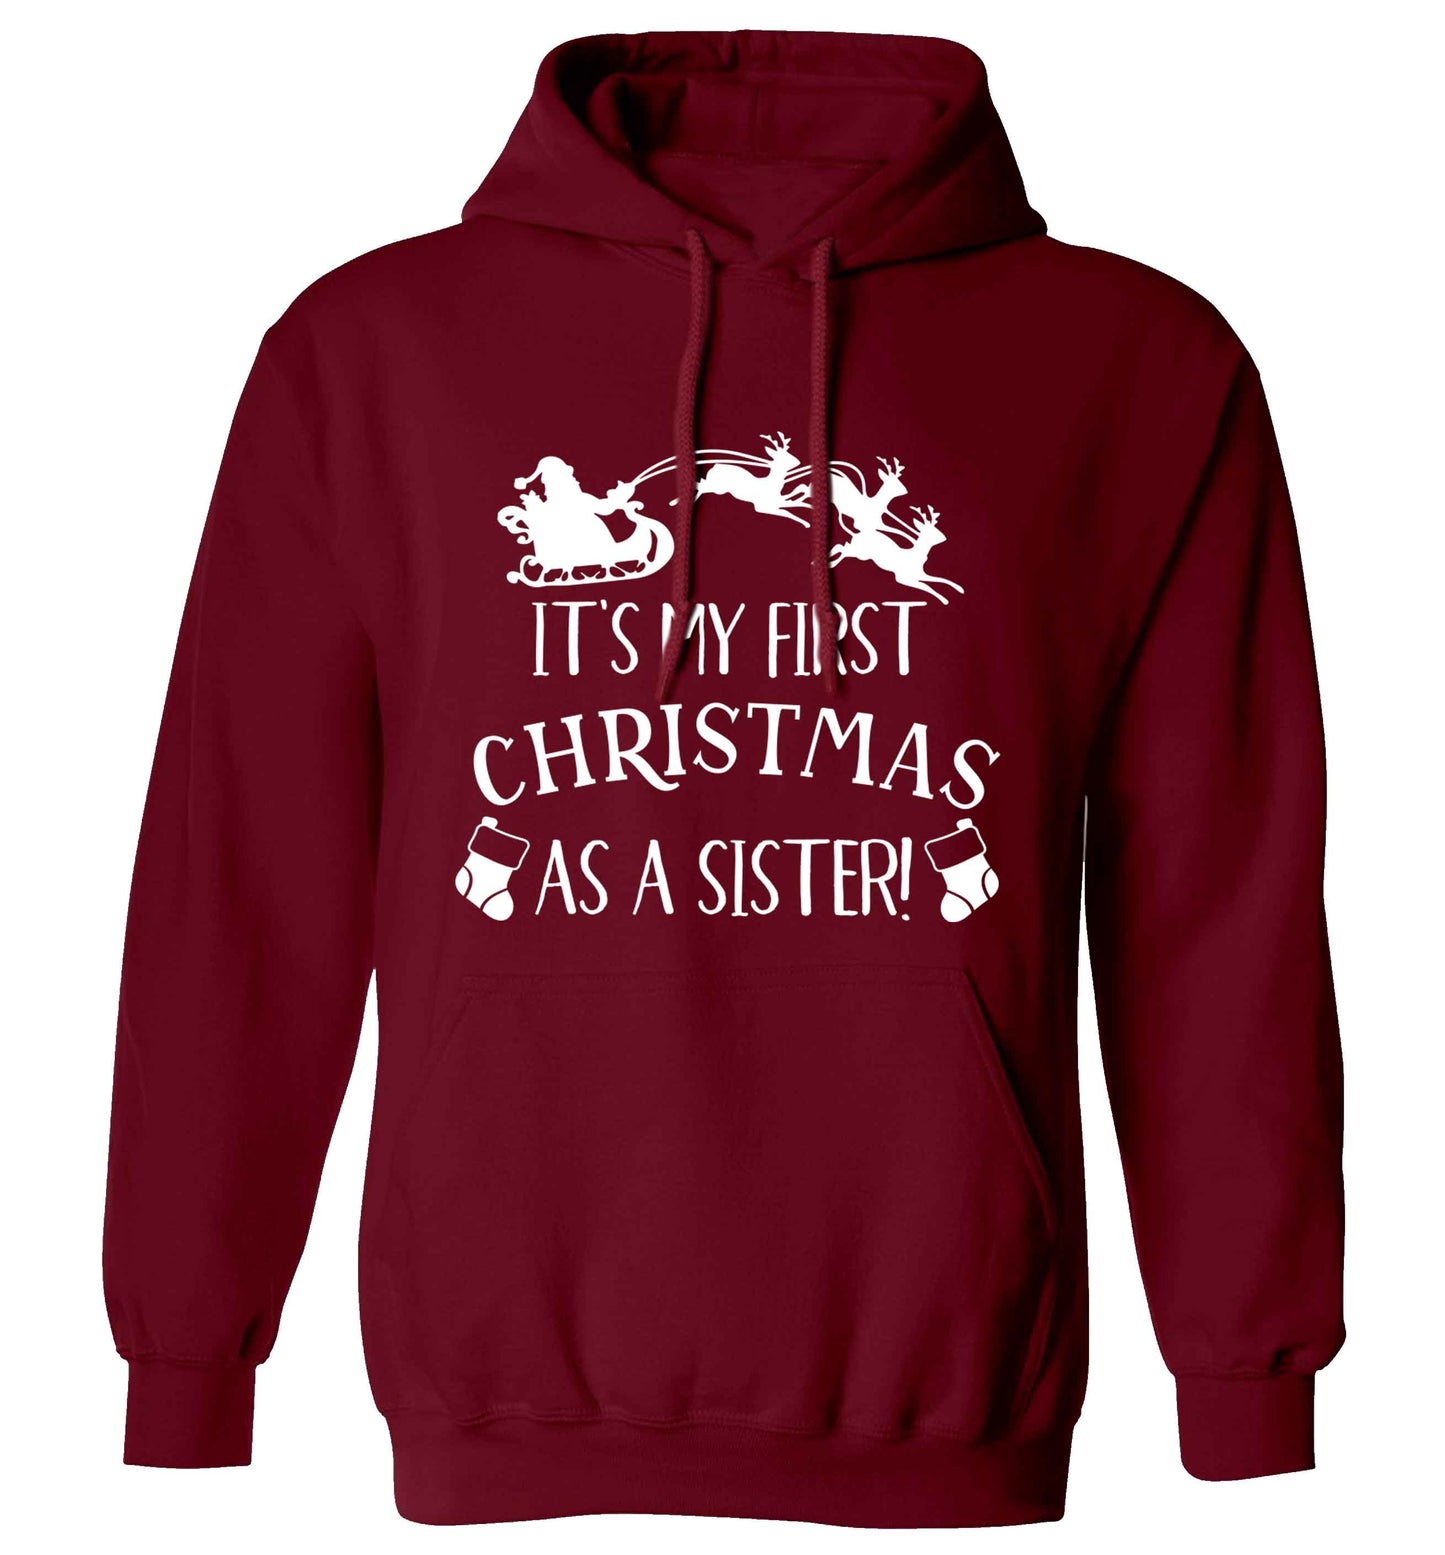 It's my first Christmas as a sister! adults unisex maroon hoodie 2XL